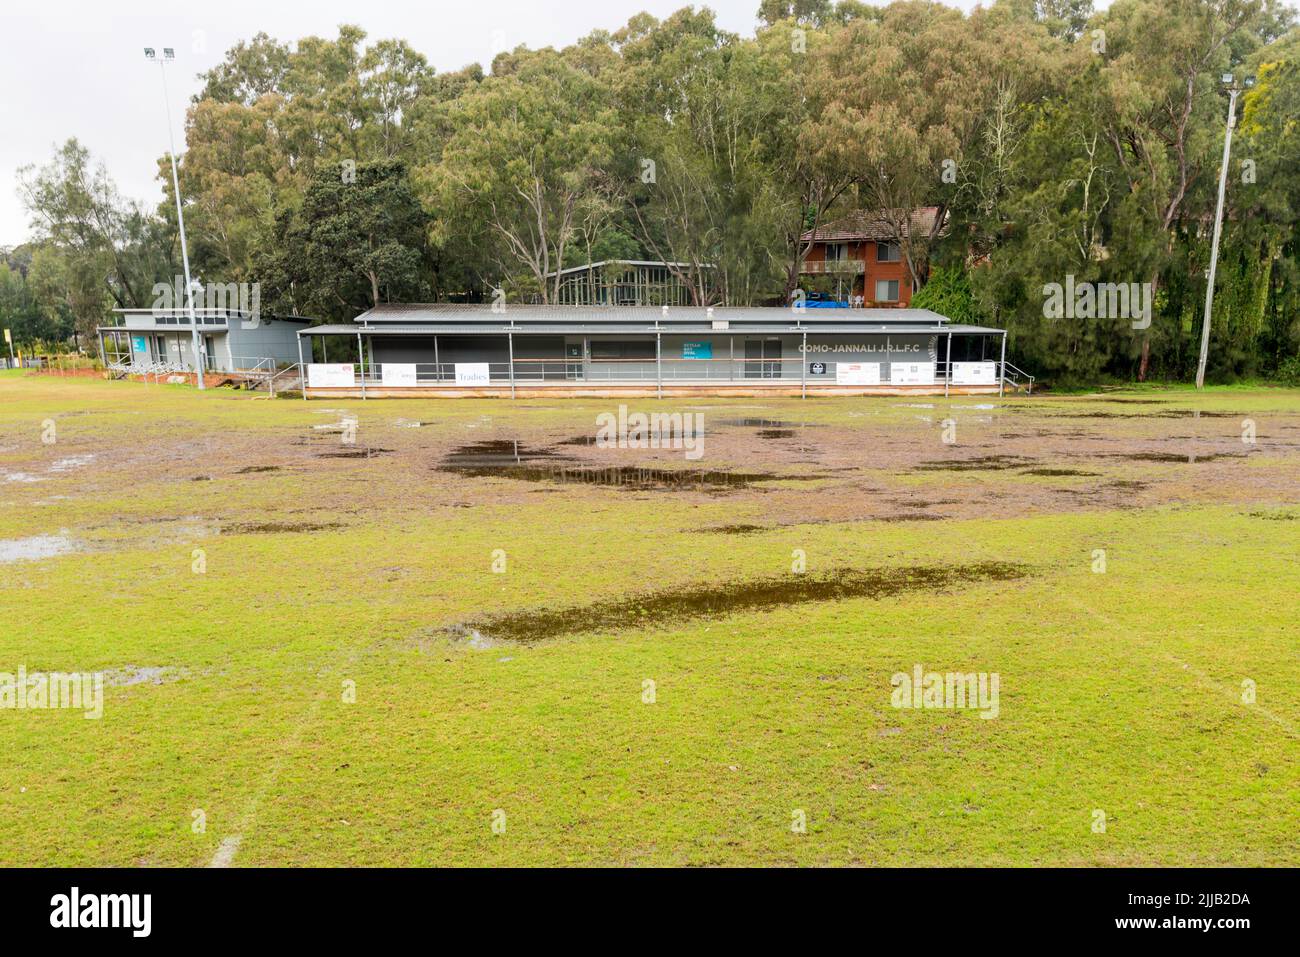 July 25, 2022 Como, Sydney, Australia: Scylla Bay football oval in the southern Sydney suburb of Como was closed again over the weekend due to persistant rain during the week. Despite a nearly rainless June, many areas in Sydney have yet to properly dry out from the recent La Niña event and the Como Junior Rugby League Football Club oval is no exception. The Club's Facebook page records that three of the last four weekends have been washed out. Photo Credit Stephen Dwyer Alamy.com Stock Photo